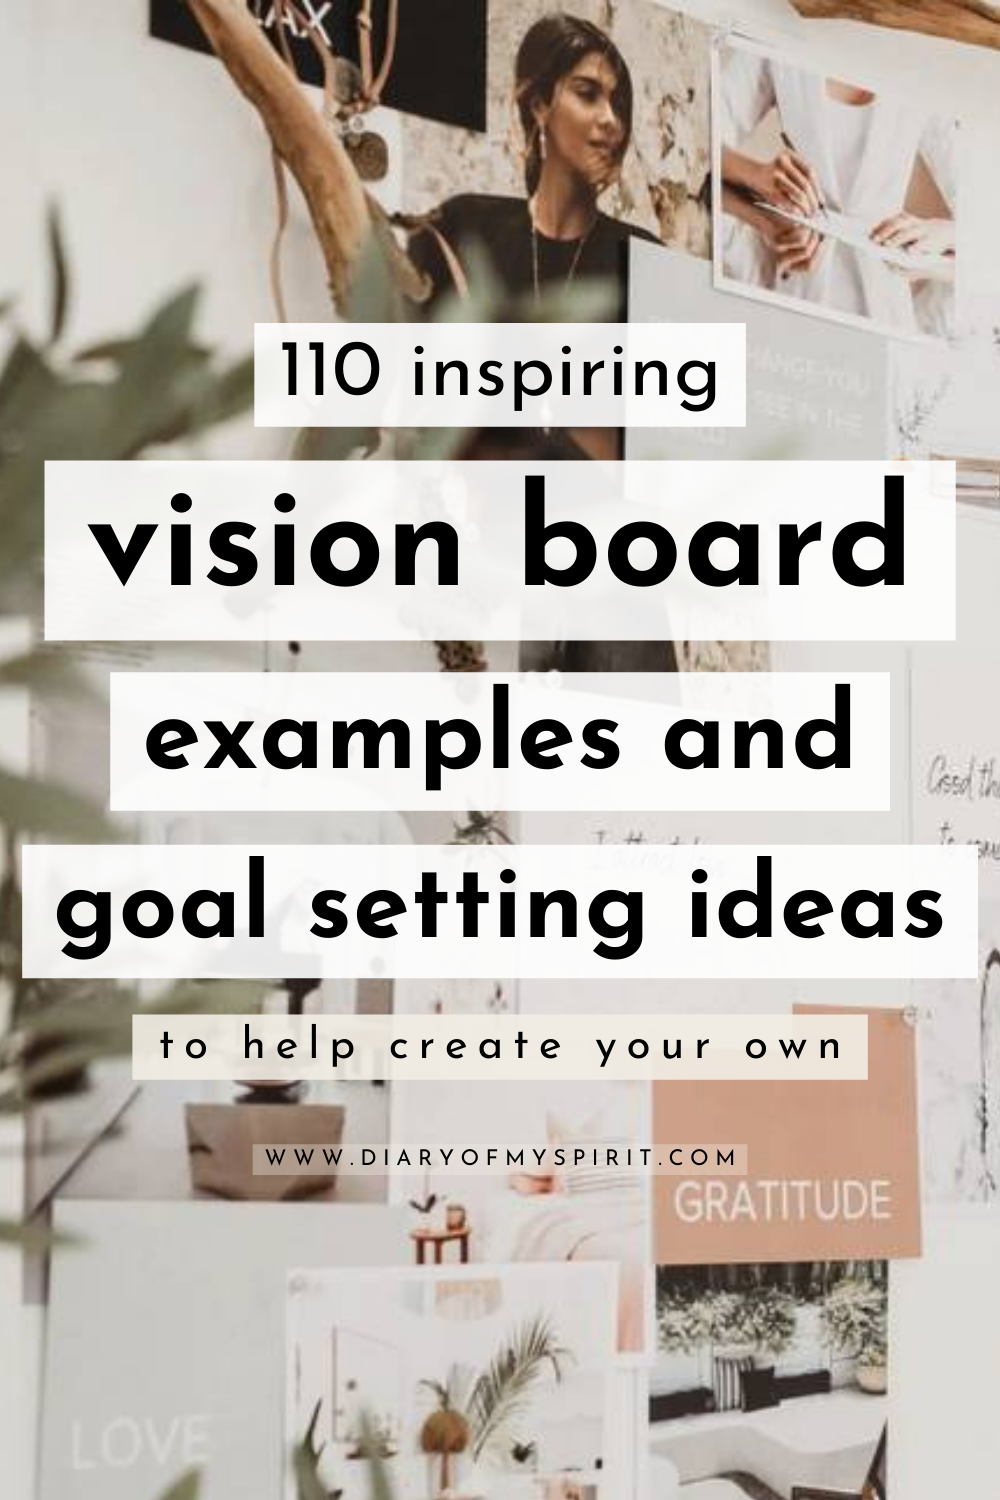 For 2021 - How to build a perfect vision board / goal board to achieve your  goals?